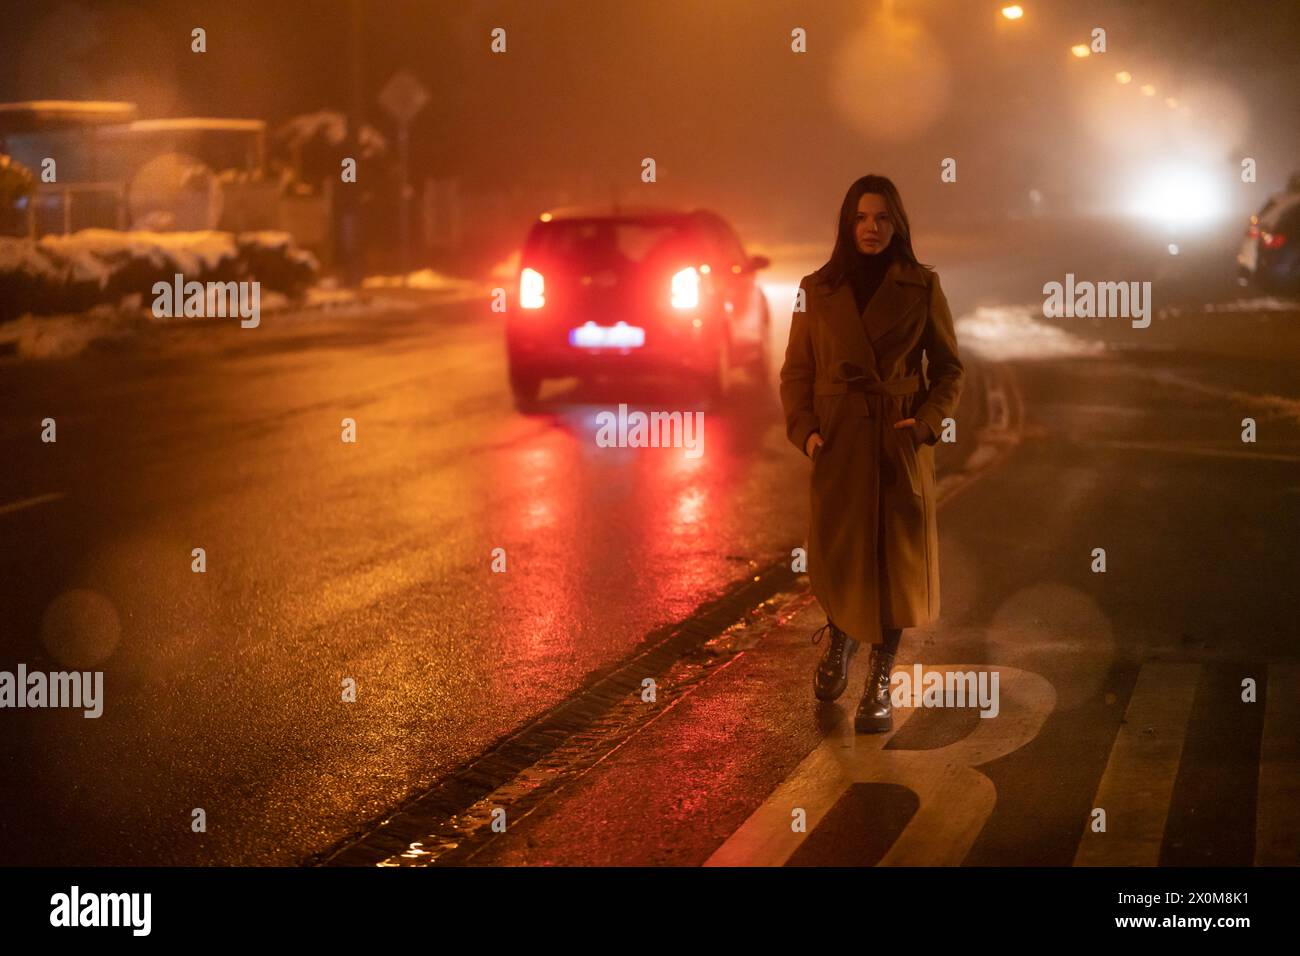 Young woman in a long coat standing by a road. Stock Photo